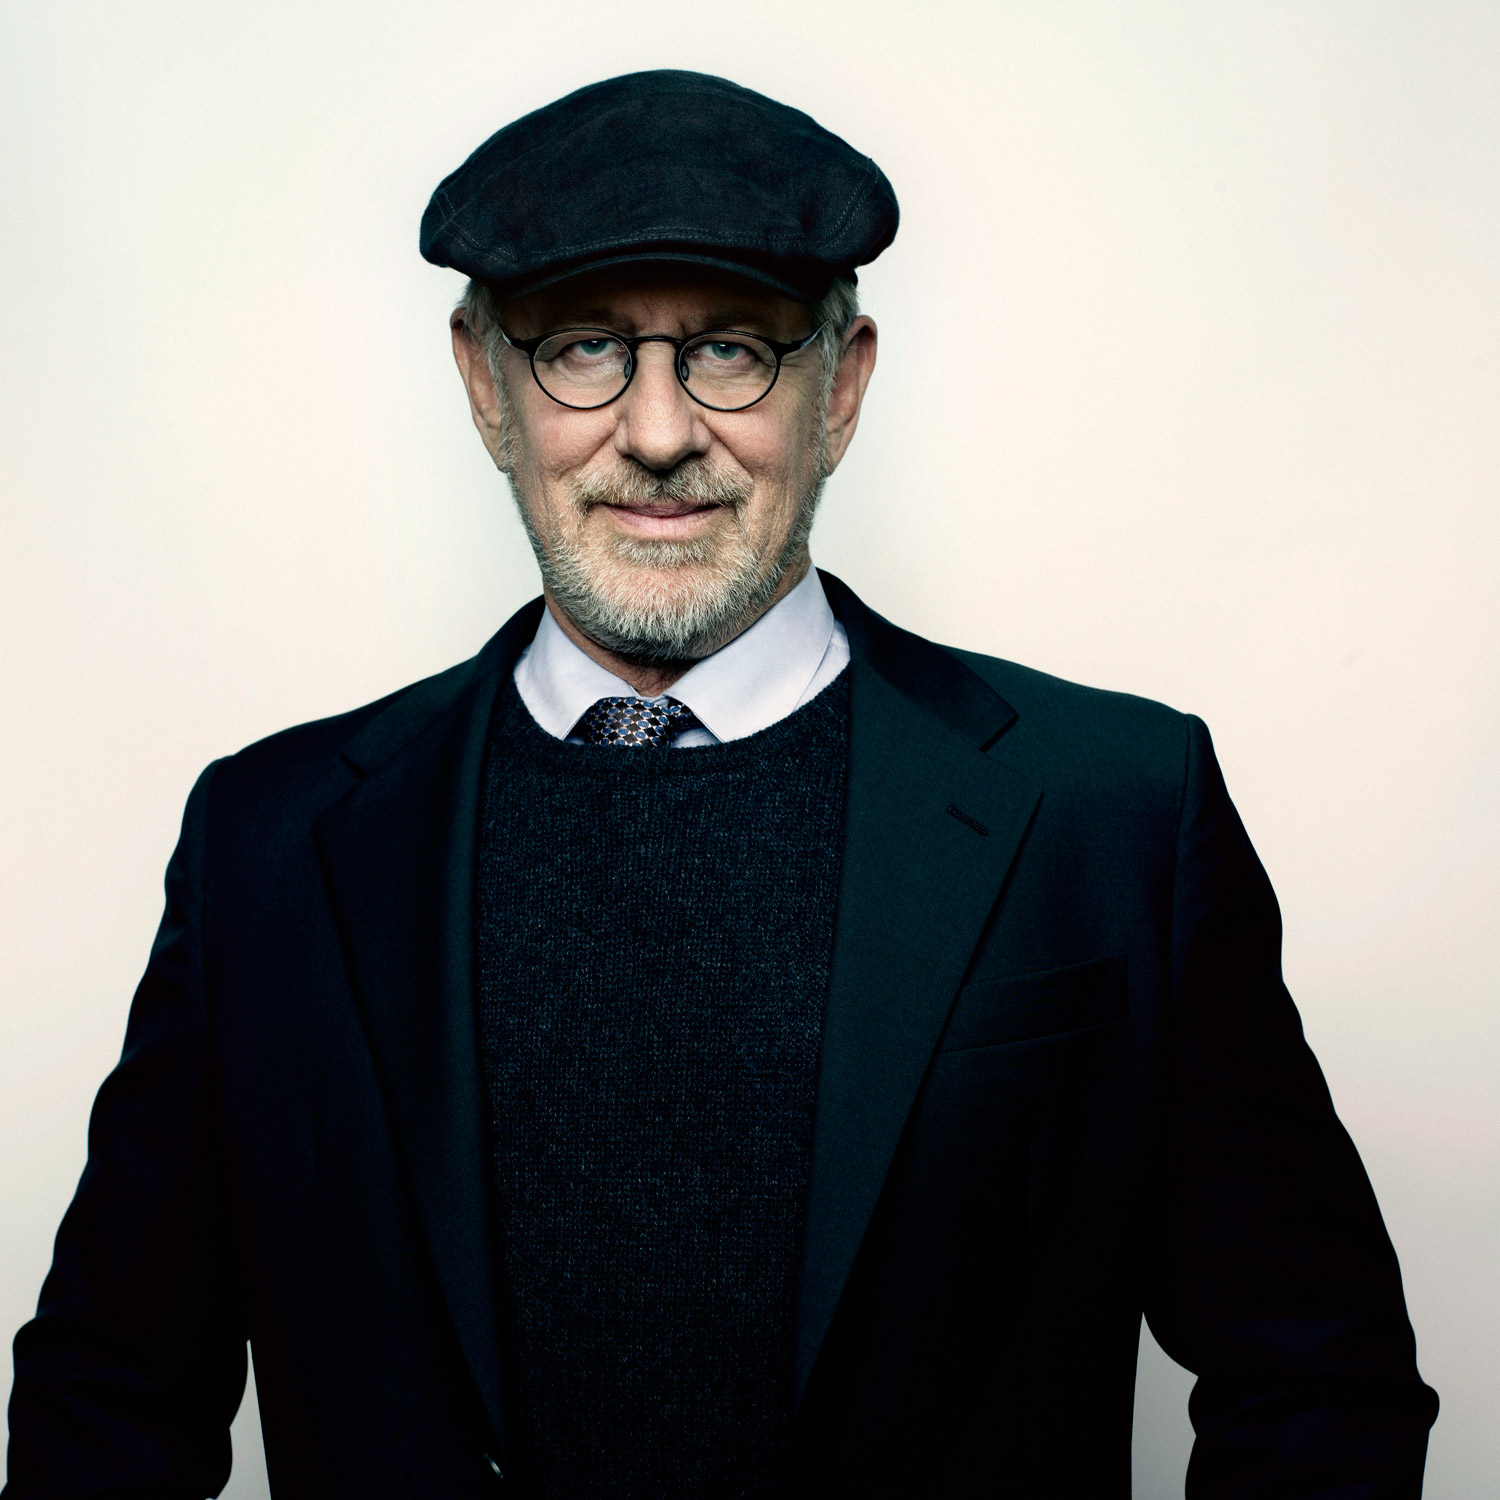 Steven Spielberg, director. From  Tintin in Hollywood,  Nov. 28, 2011, issue.